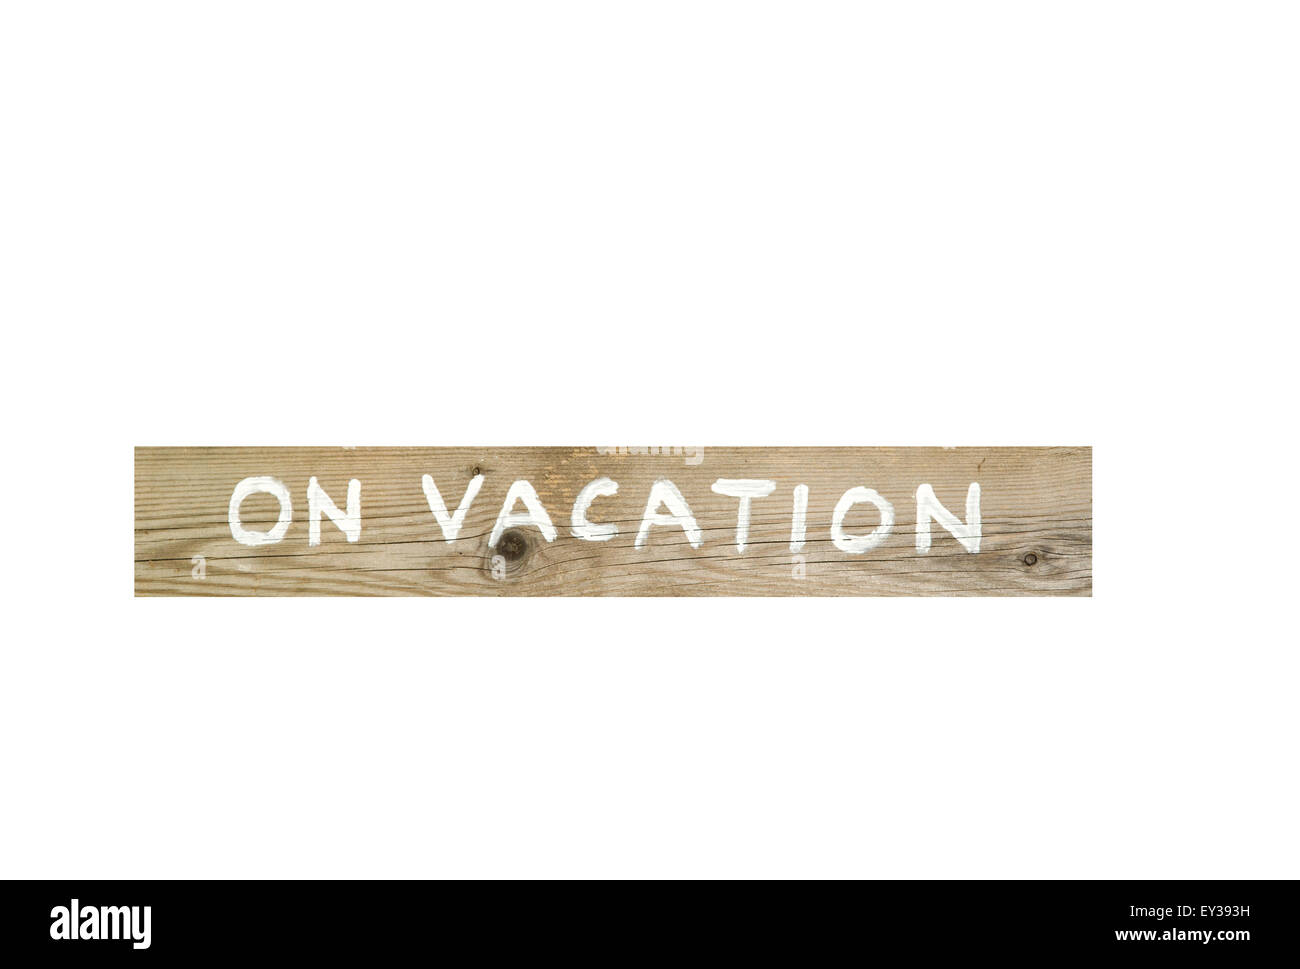 On vacation wooden sign isolated at white Stock Photo